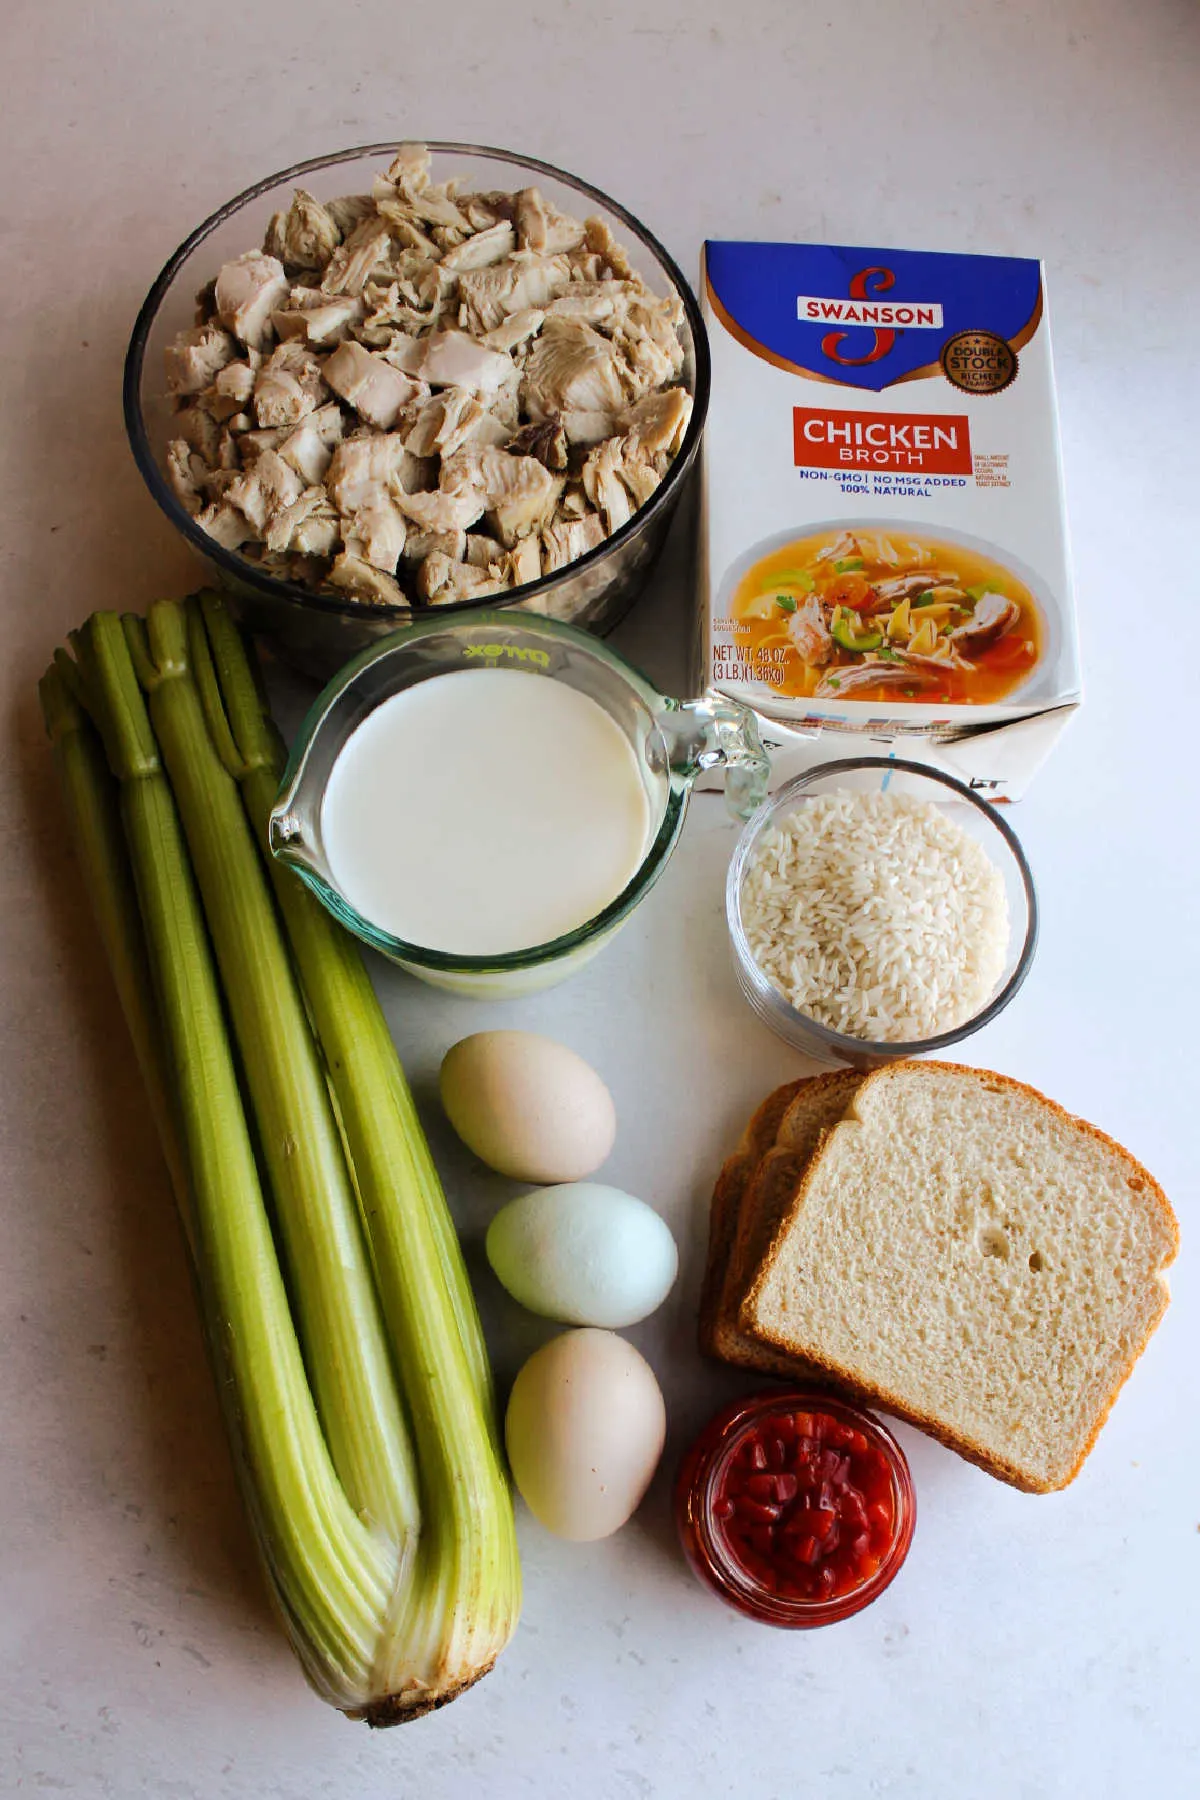 Ingredients: turkey, rice, milk, eggs, celery, bread and stock ready to be made into casserole.